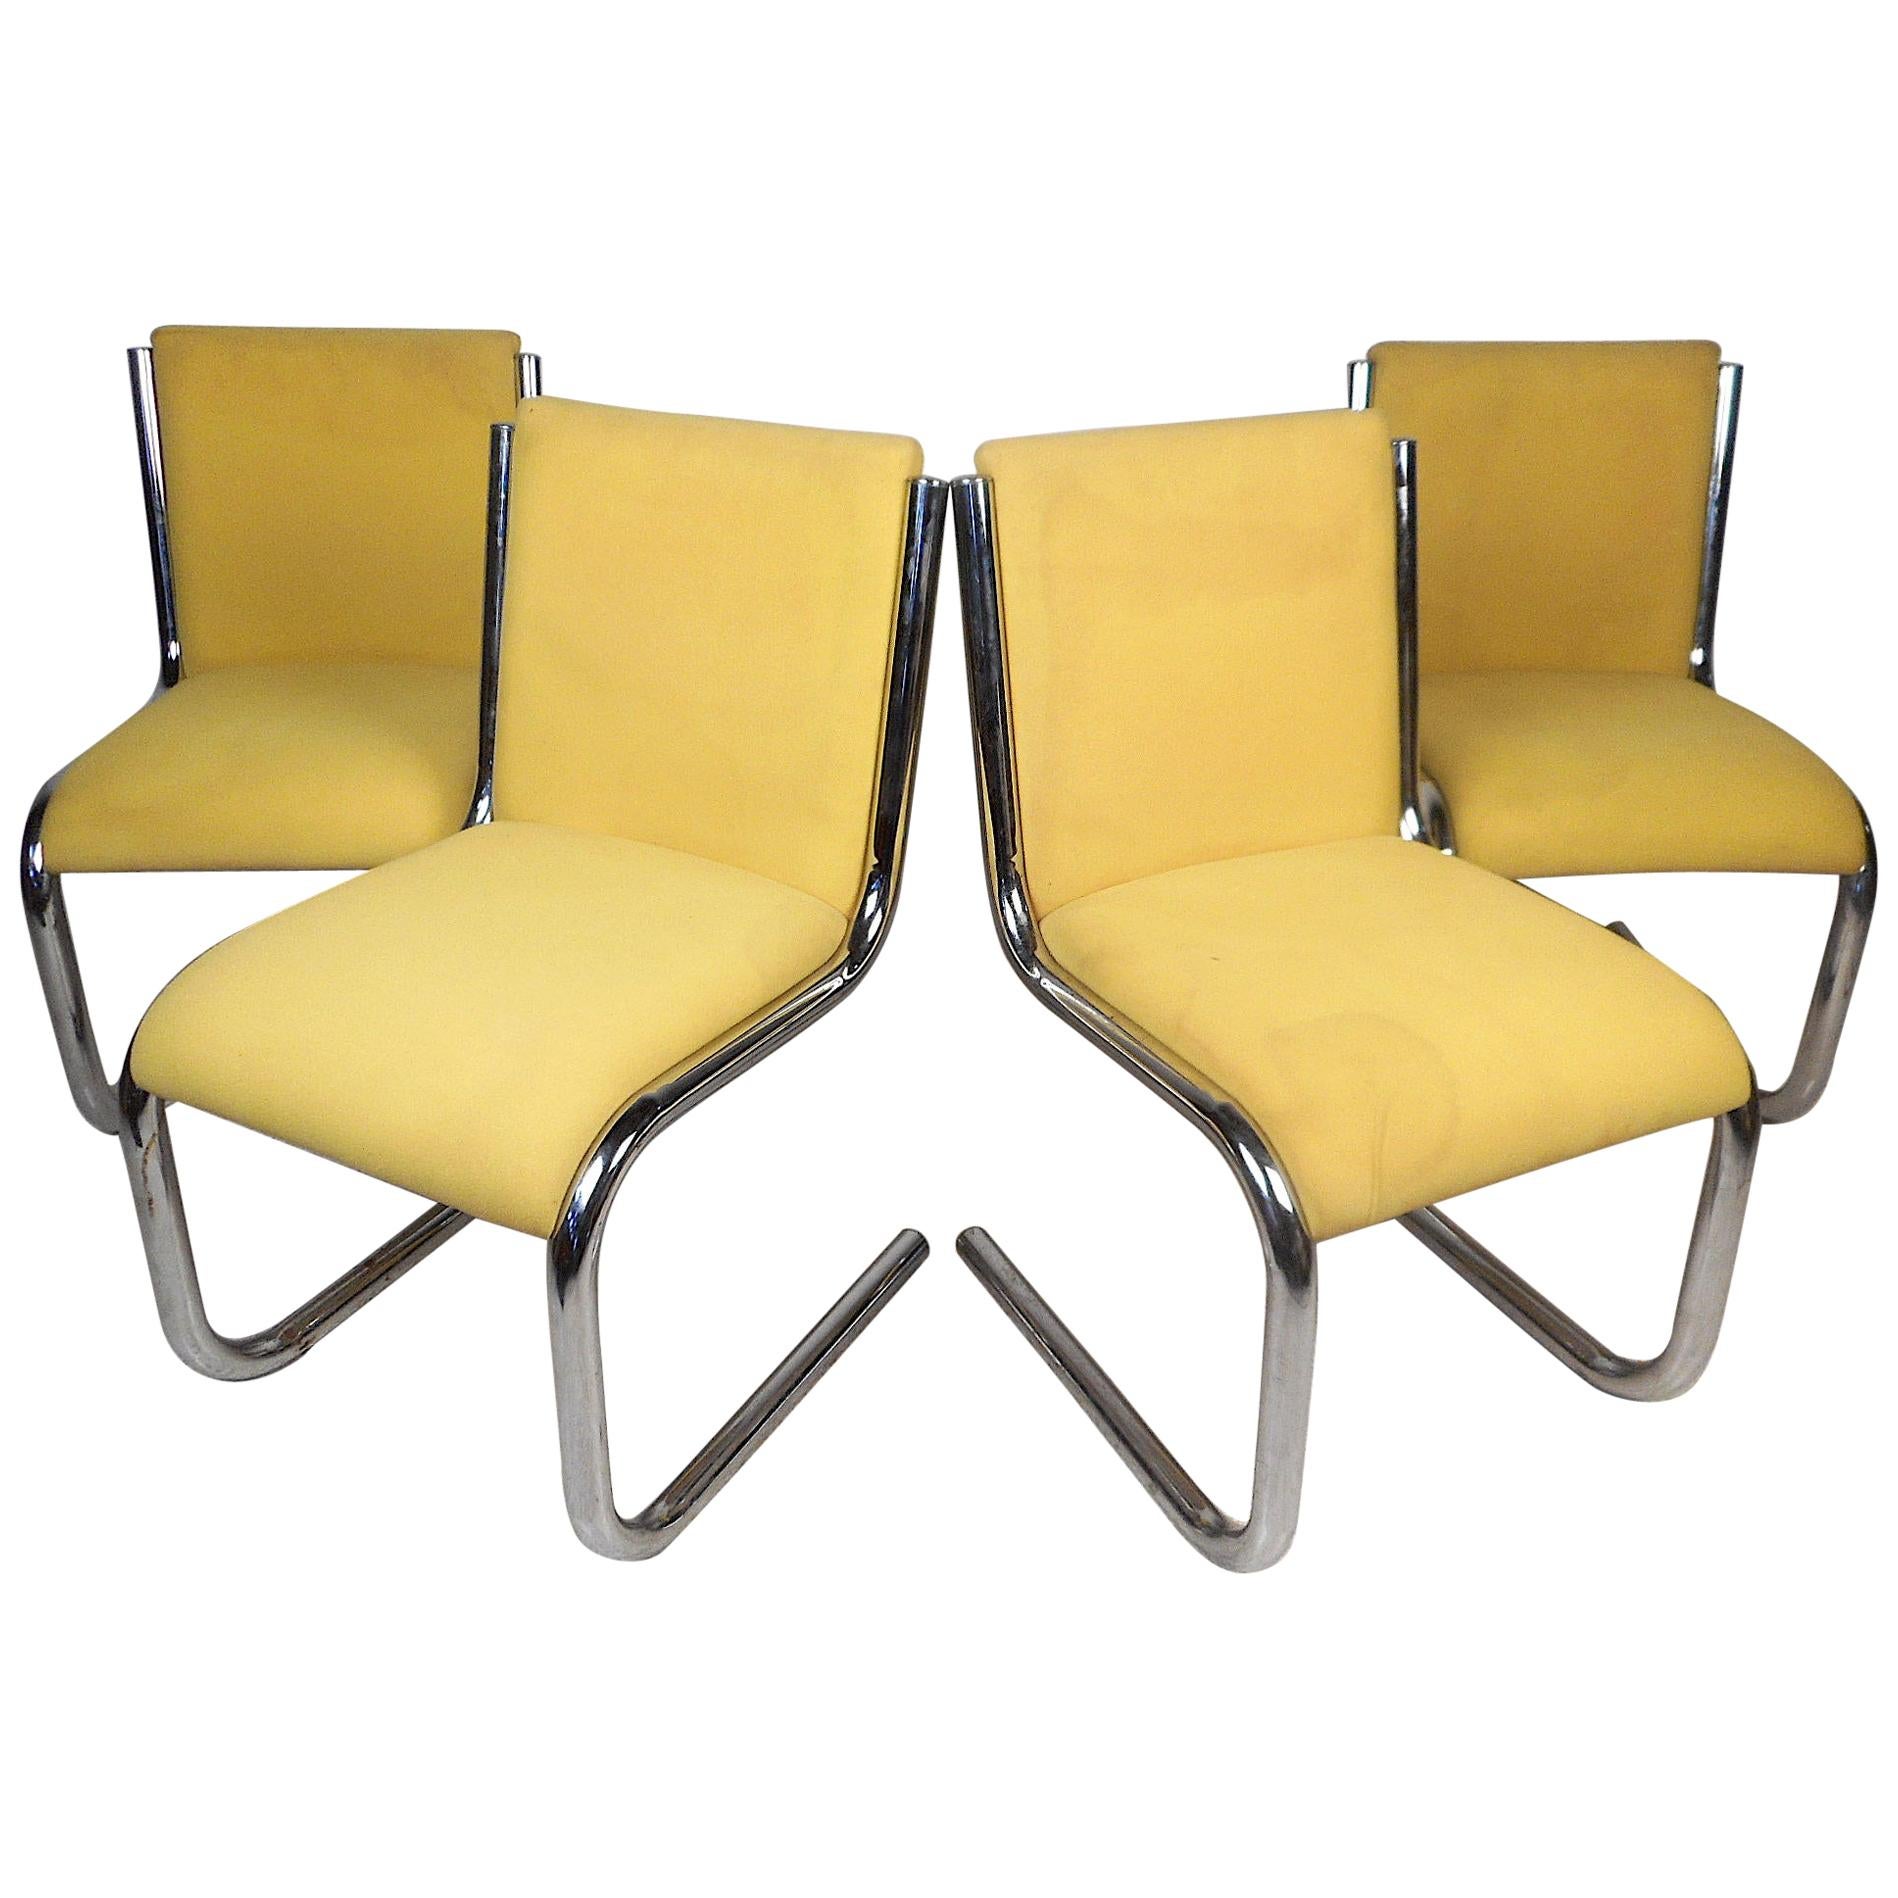 Midcentury Chrome Cantilevered Chairs, Set of 4